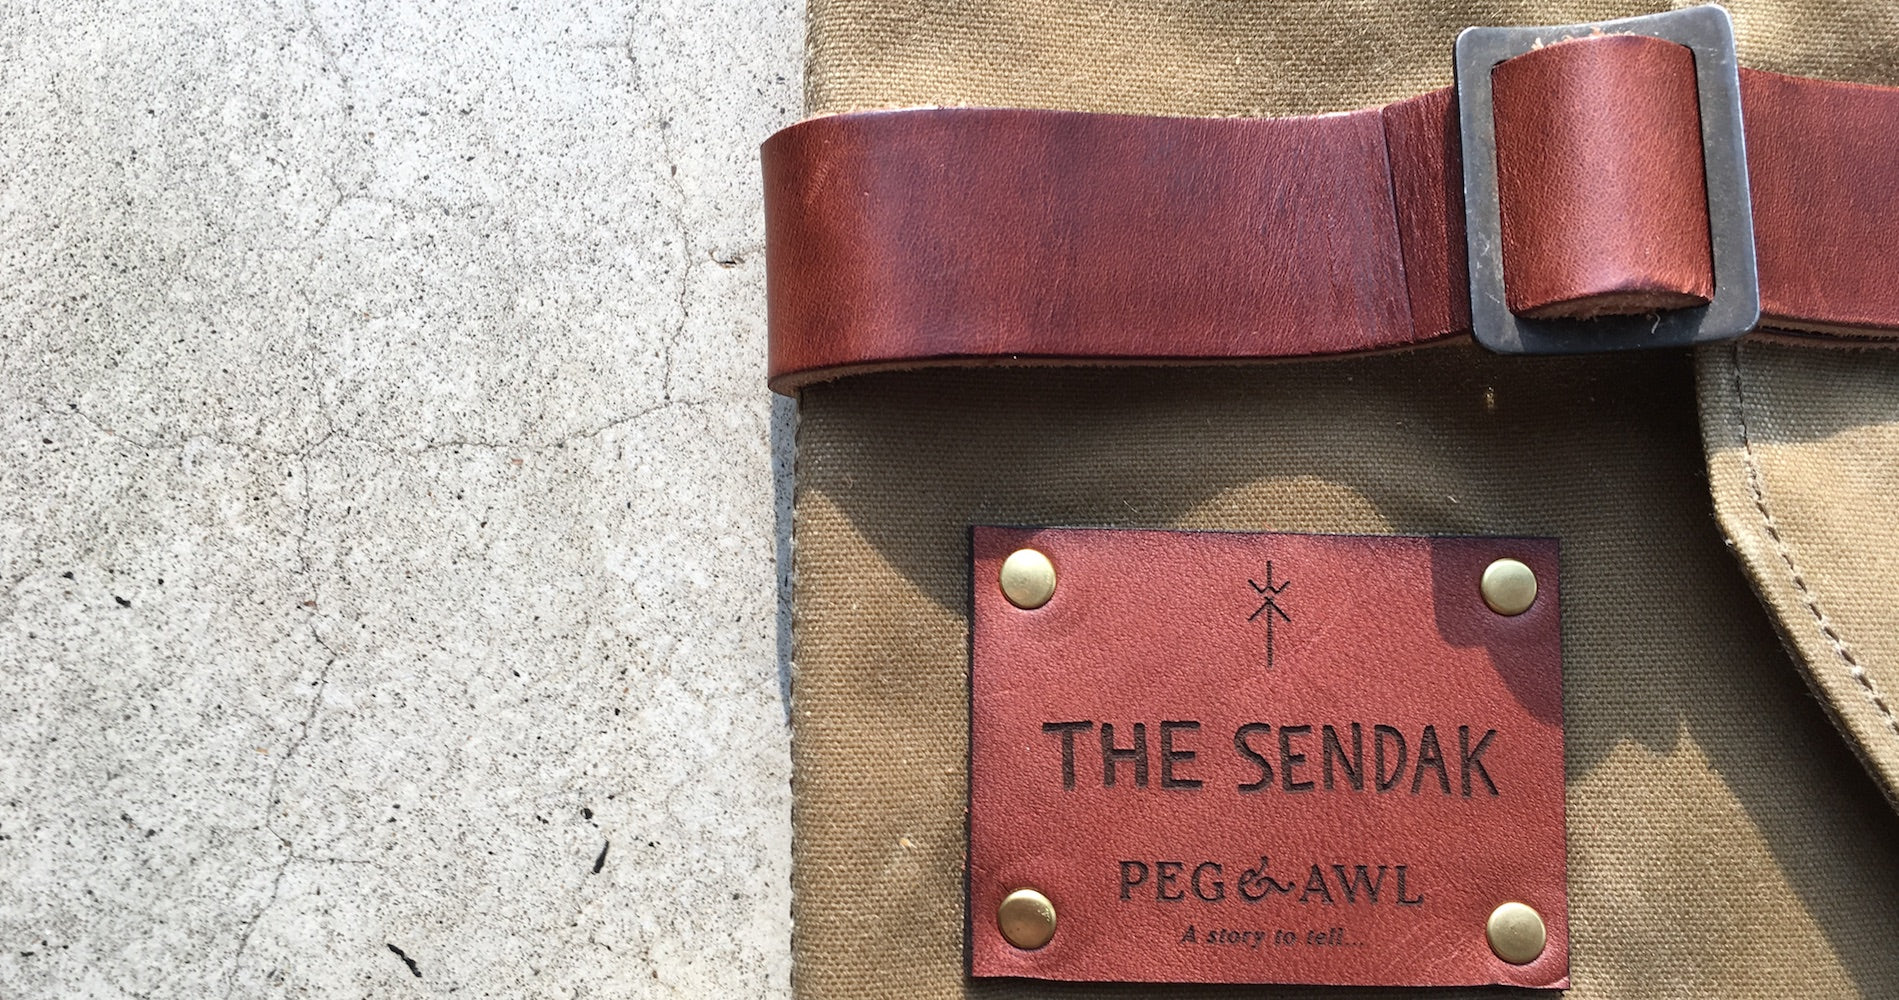 Peg and Awl bags and accessories